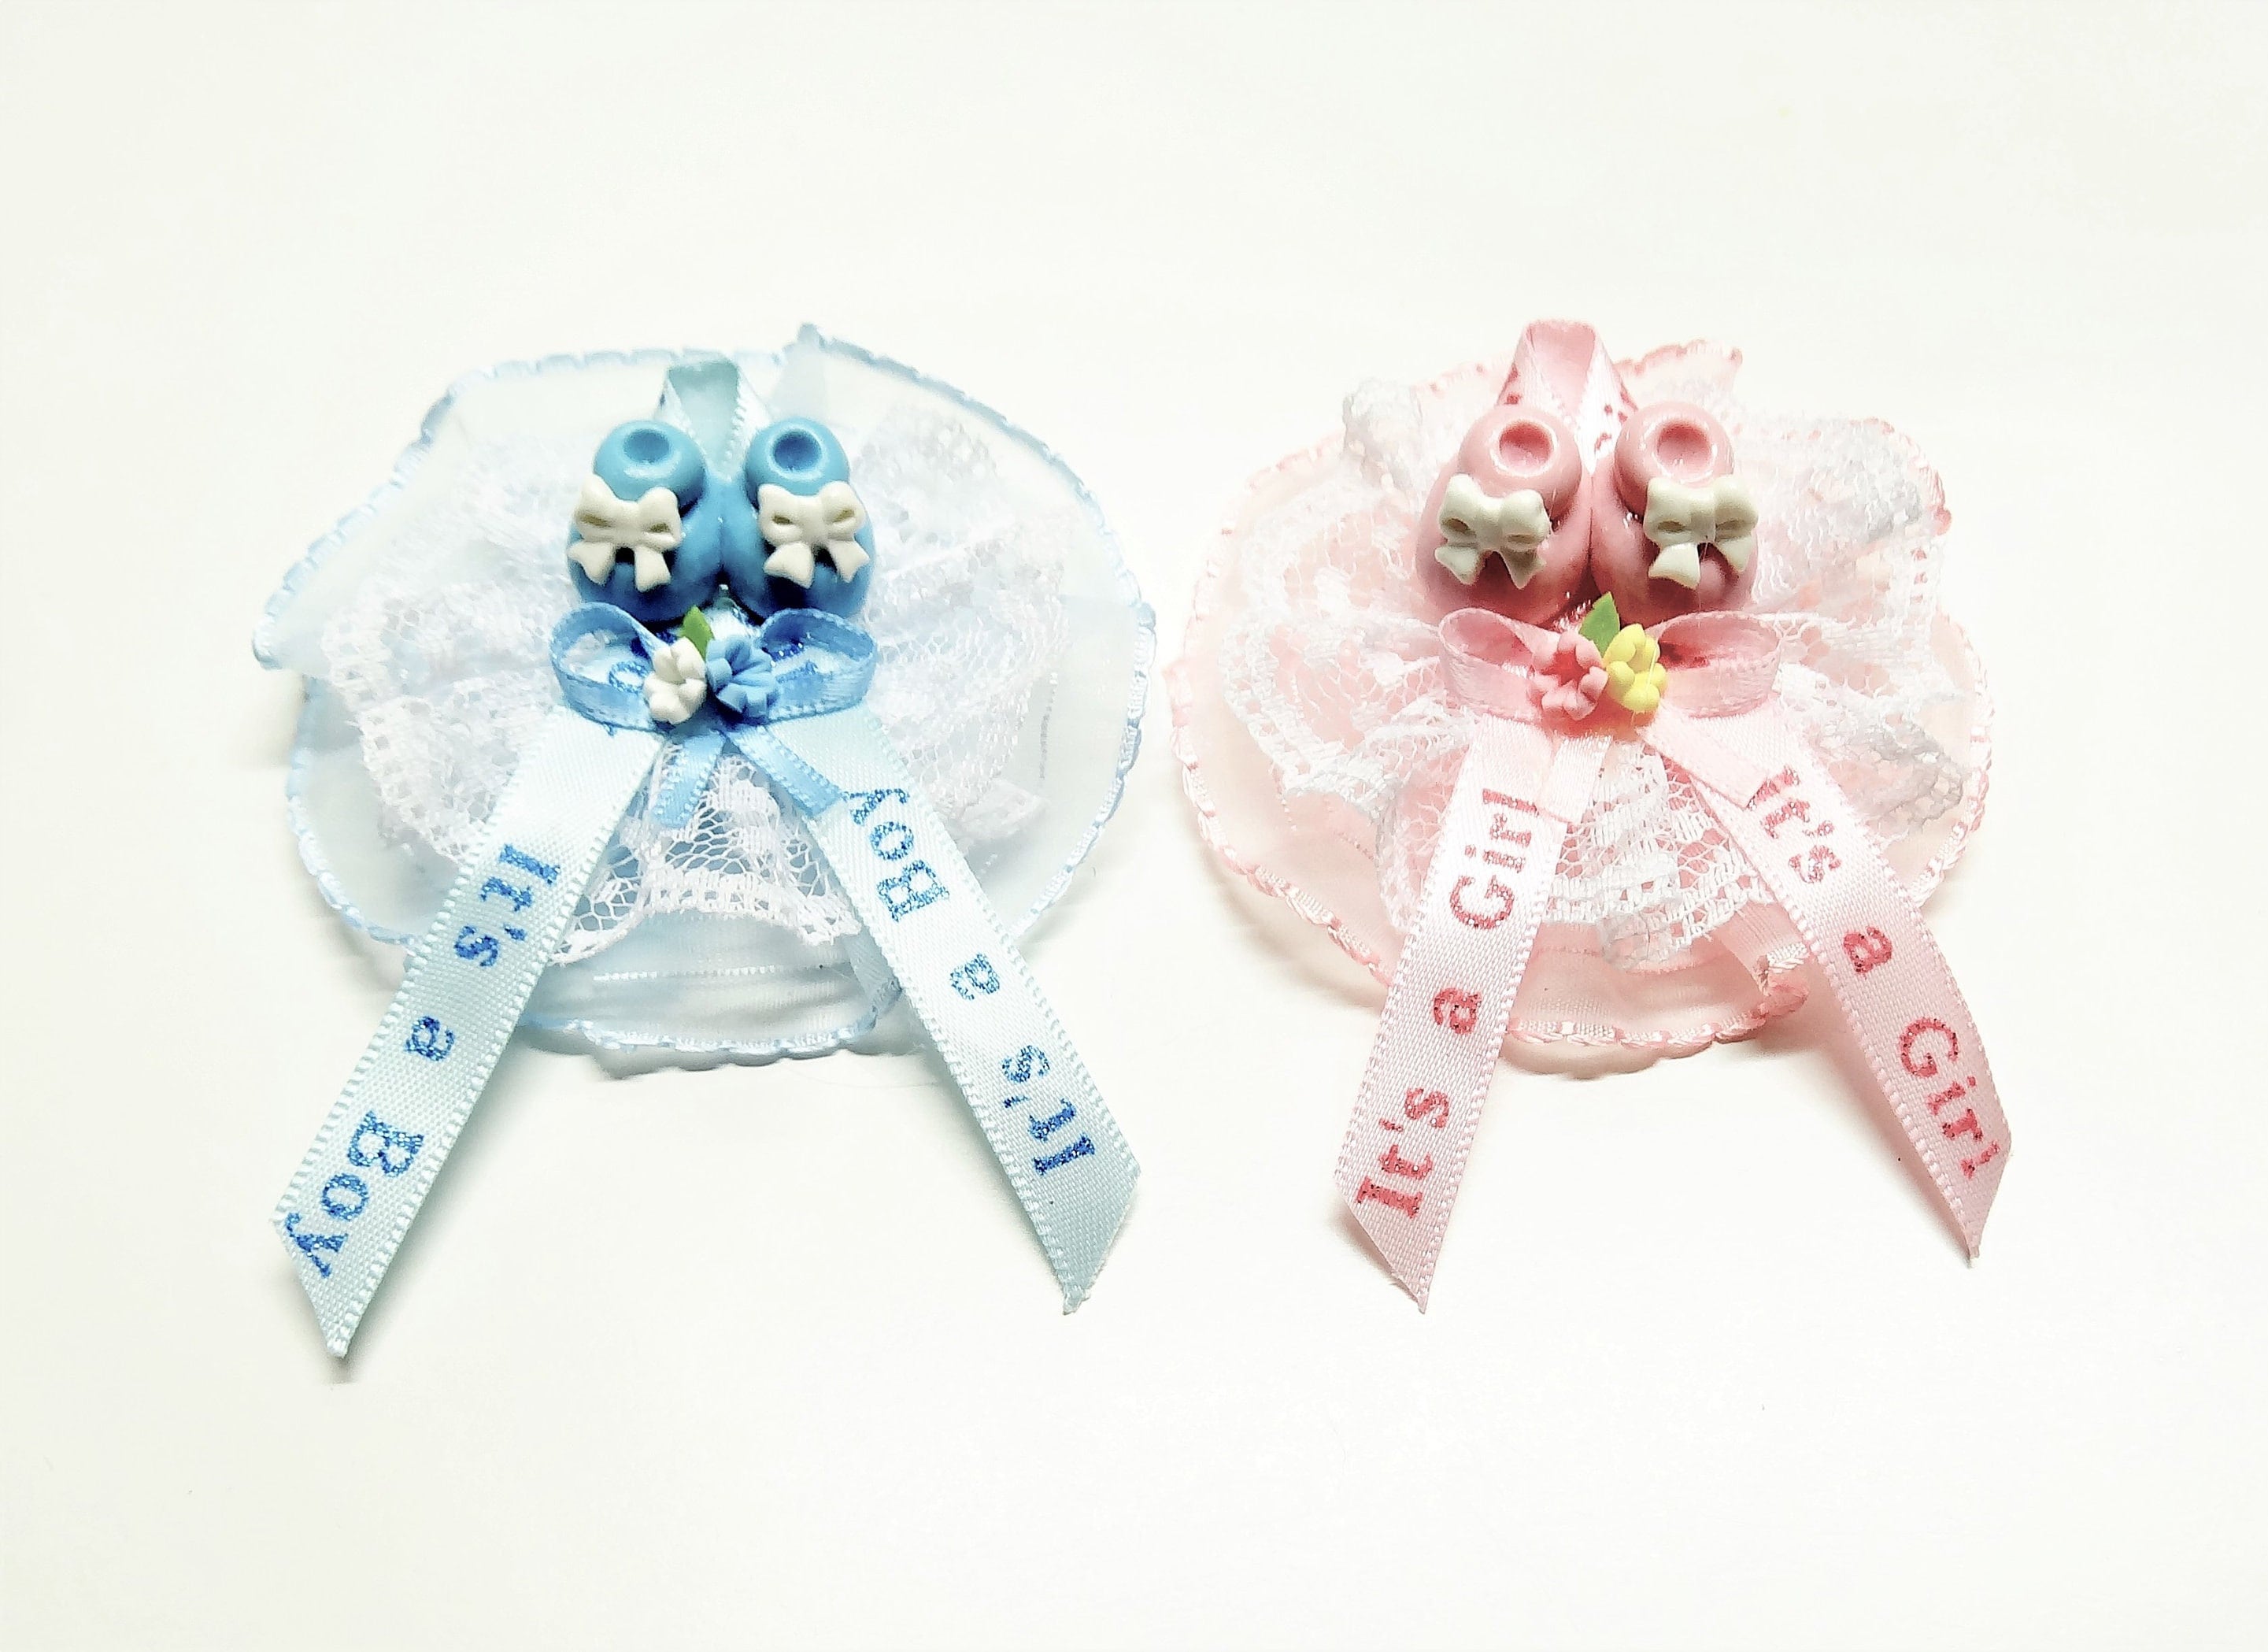 Baby Shower Capia pin on - The Brat Shack Party Store